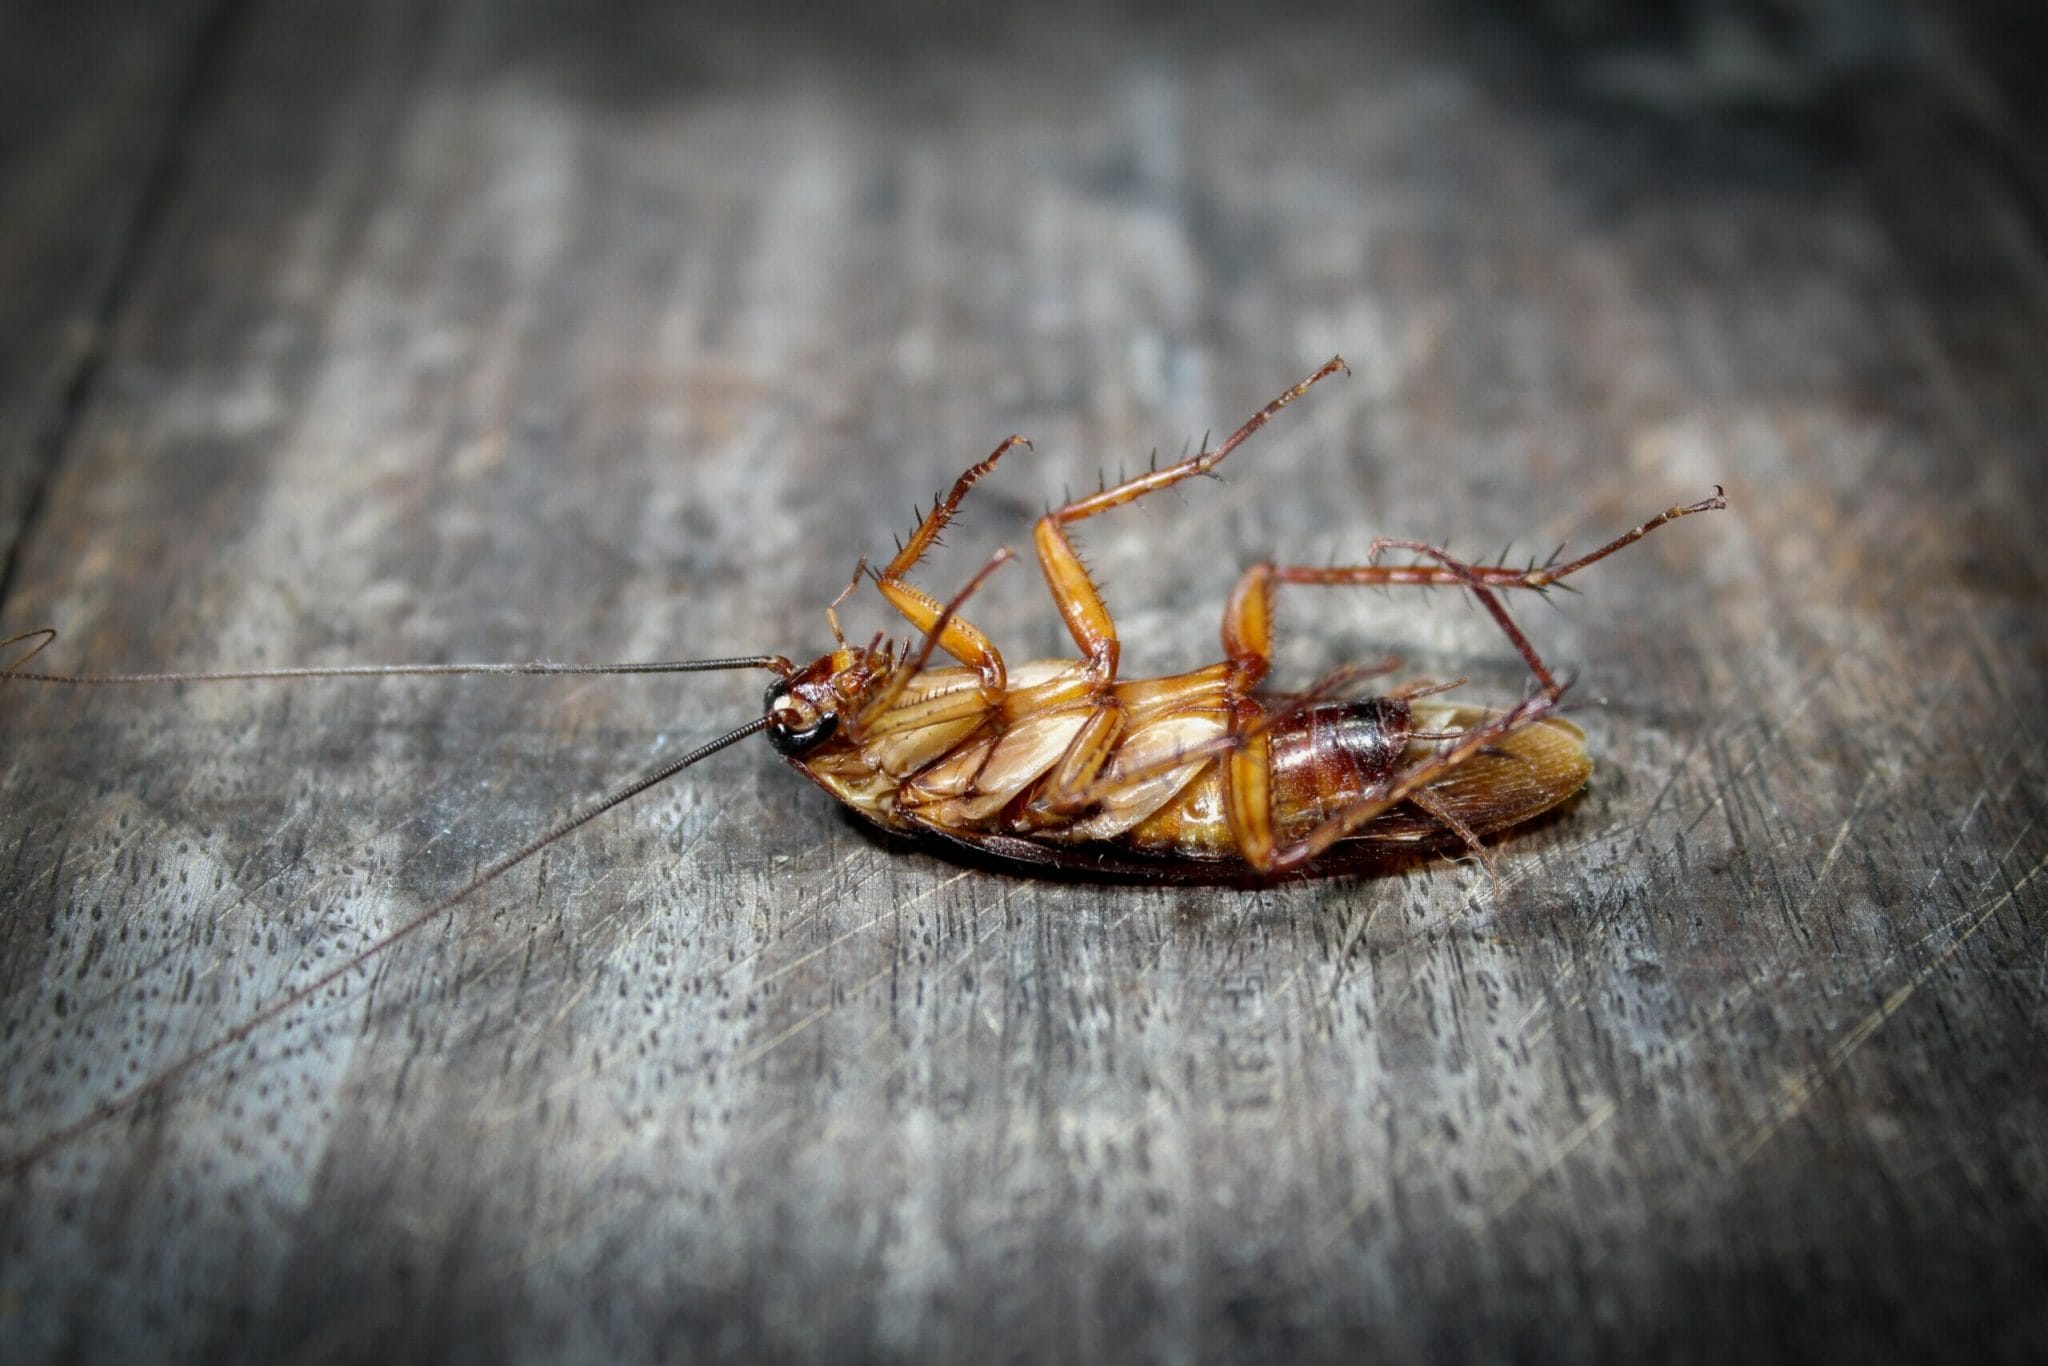 Why should you keep roaches out of your dog's food?